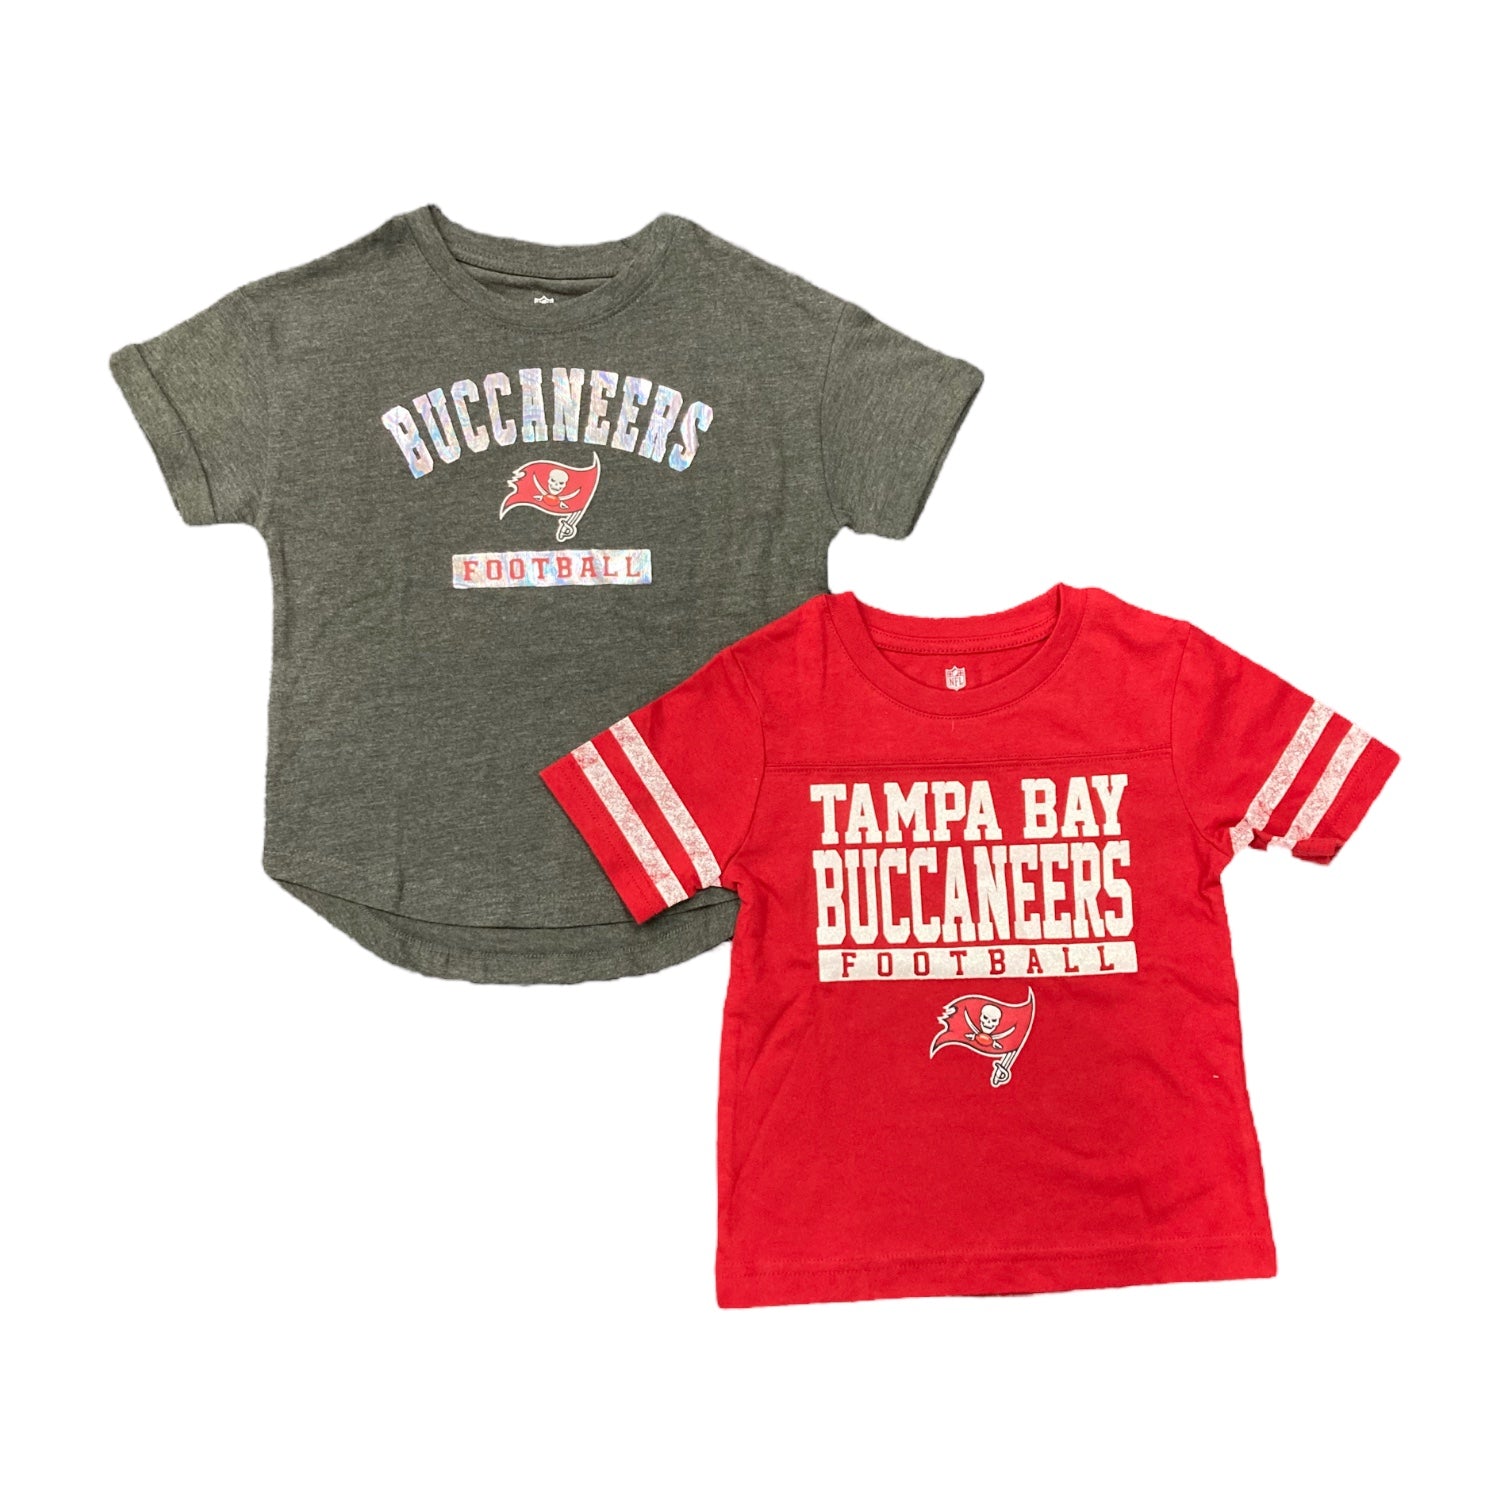 NFL Team Apparel Youth Girl's Tampa Bay Buccaneers Short Sleeve T